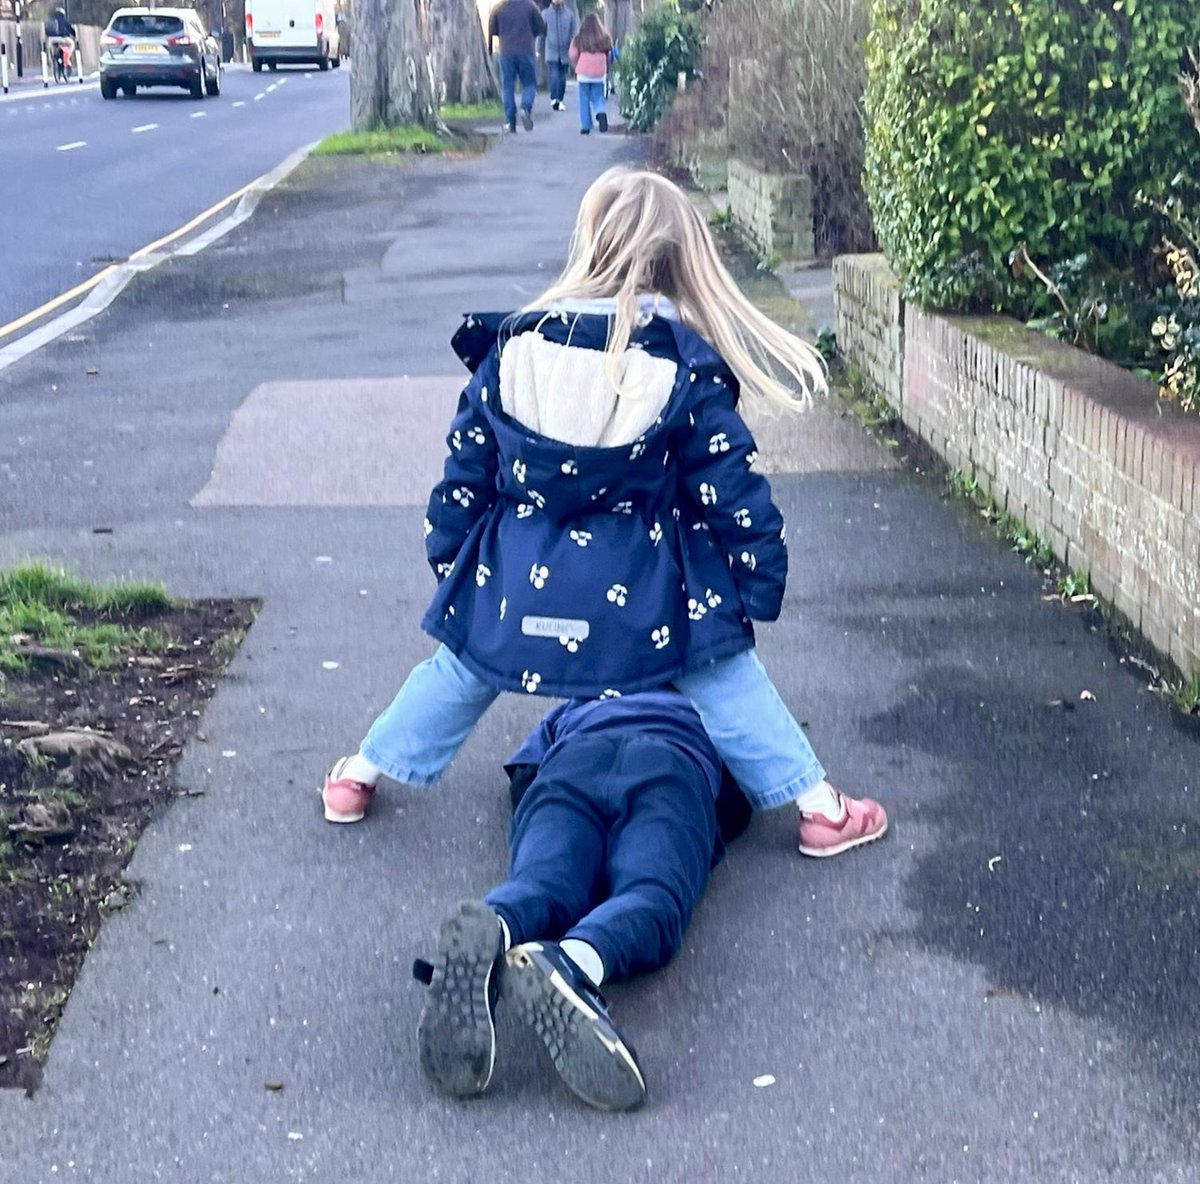 🚶🏻‍♀️When is a Walk not a Walk?

🐸 When it’s Leapfrog time!

It’s essential our streets are places where kids have the space to be kids.
Not just spaces to accommodate cars.
 
A walk home from school is never a waste of time.
#RightToPlay 
#SchoolRun 
#StreetsForKids